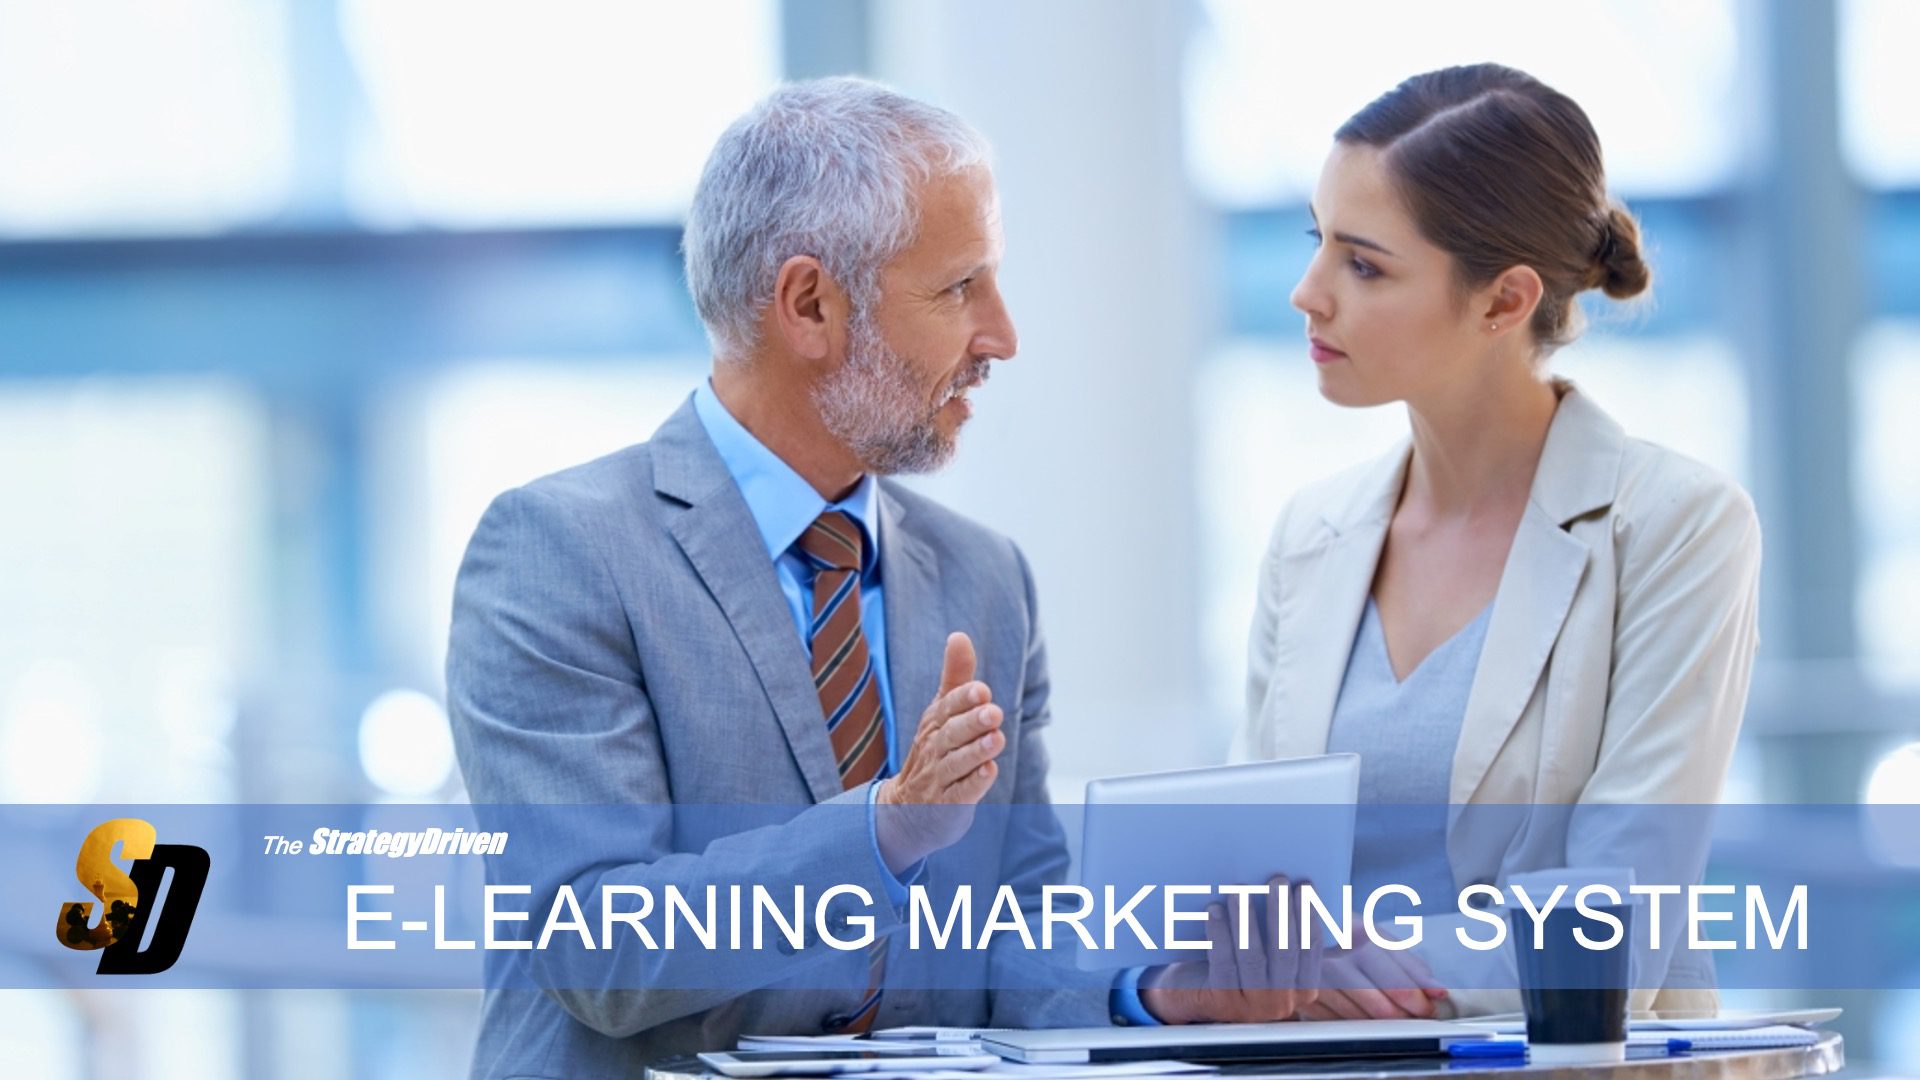 StrategyDriven E-Learning Marketing System | StrategyDriven Online Learning | Entrepreneurship Training